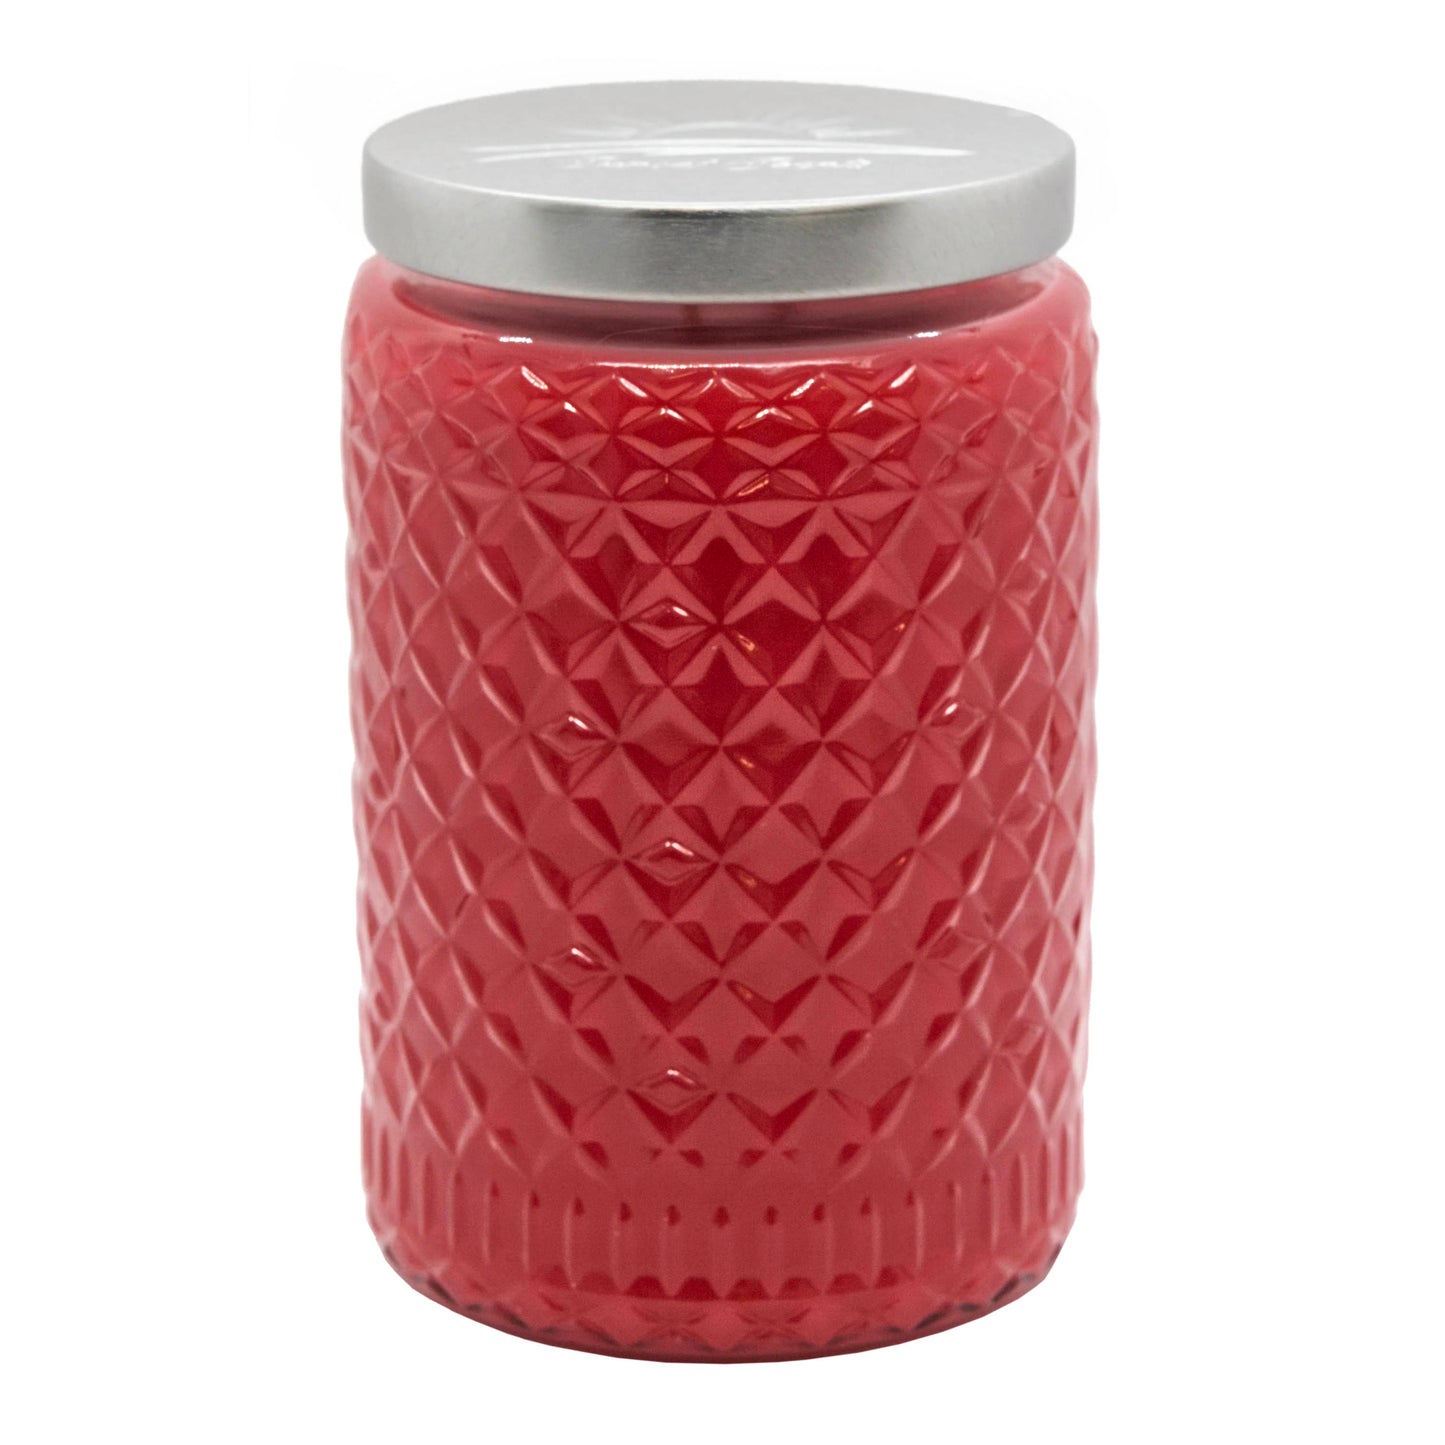 Warm & Cozy Scented Candle 24oz